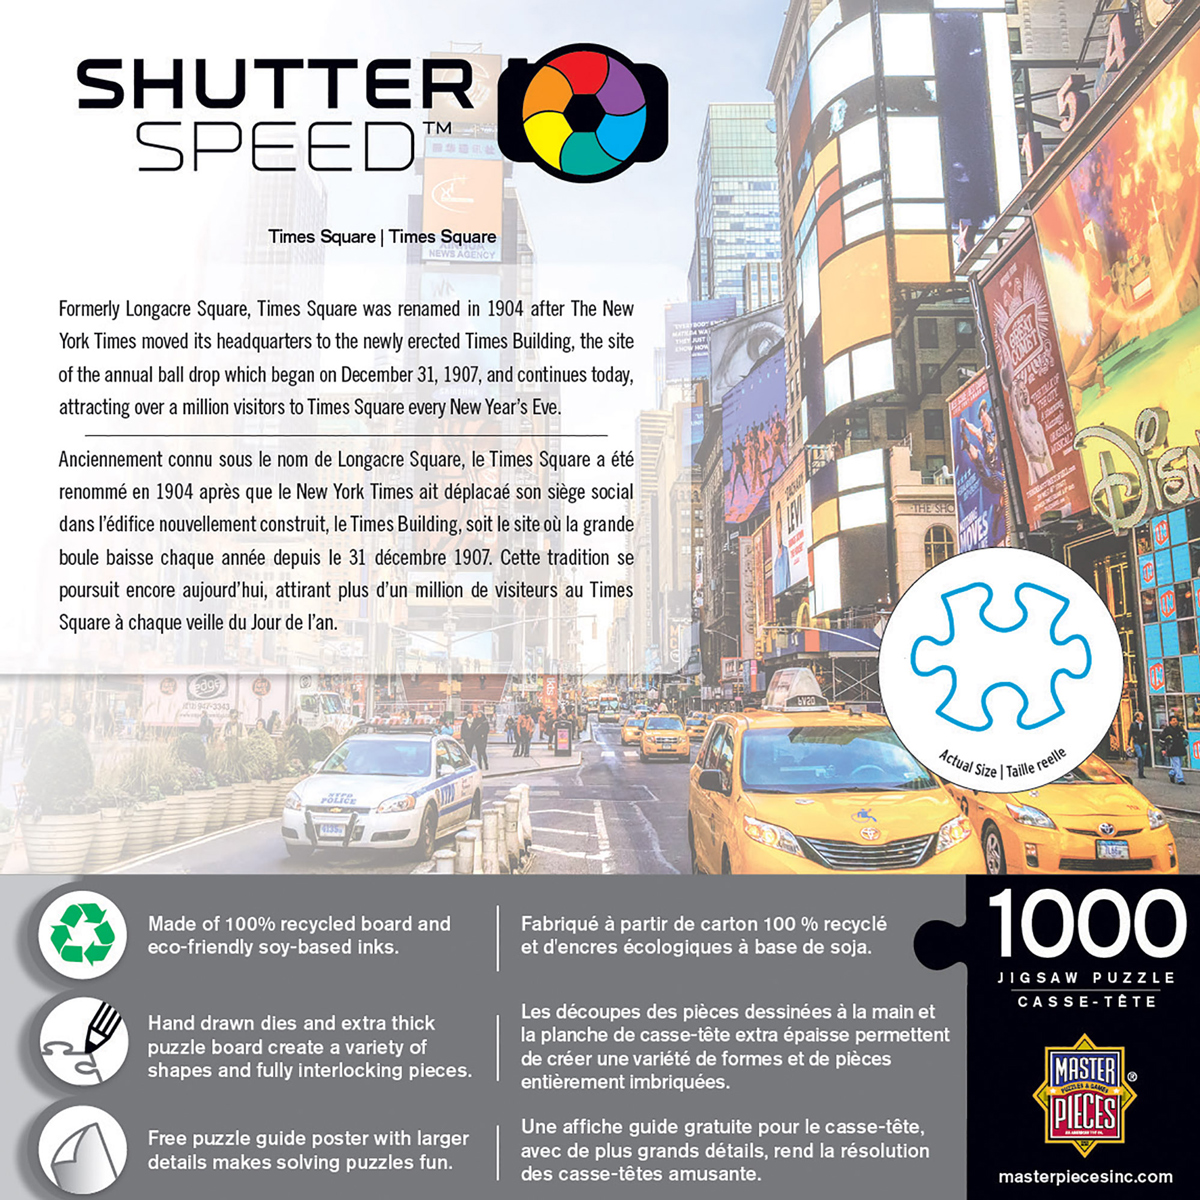 Shutterspeed - Times Square